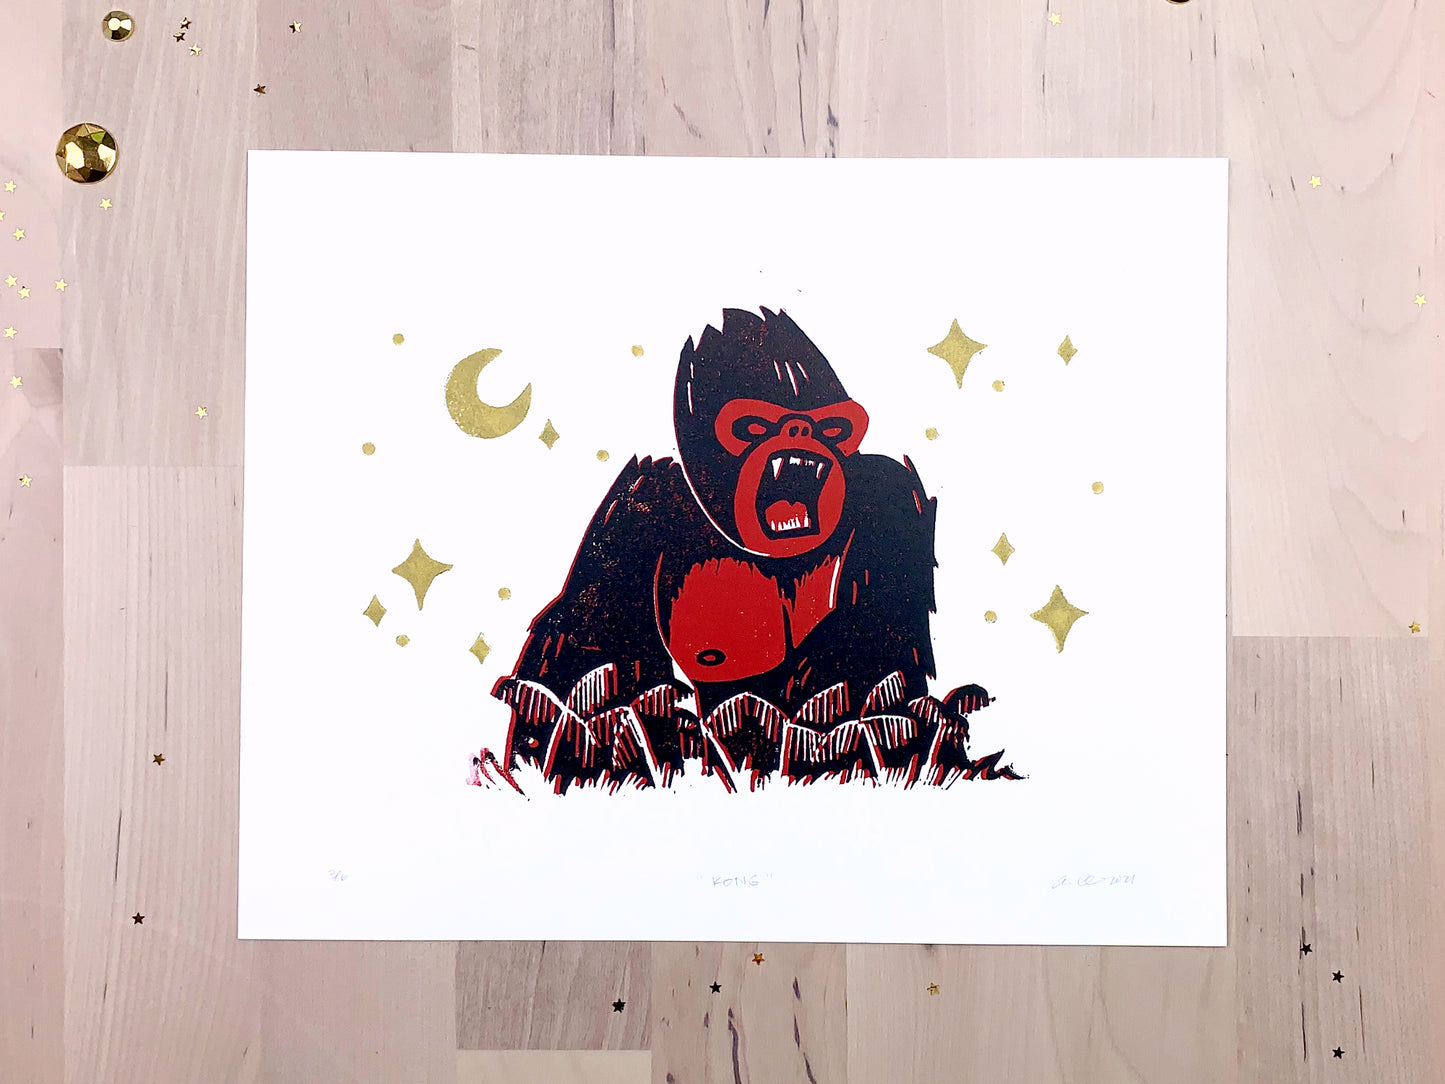 Original limited edition #3 art print by Amber Orenstein. Two color, red and black, reduction block print of a King Kong roaring on his jungle island home with gold stars and moon.